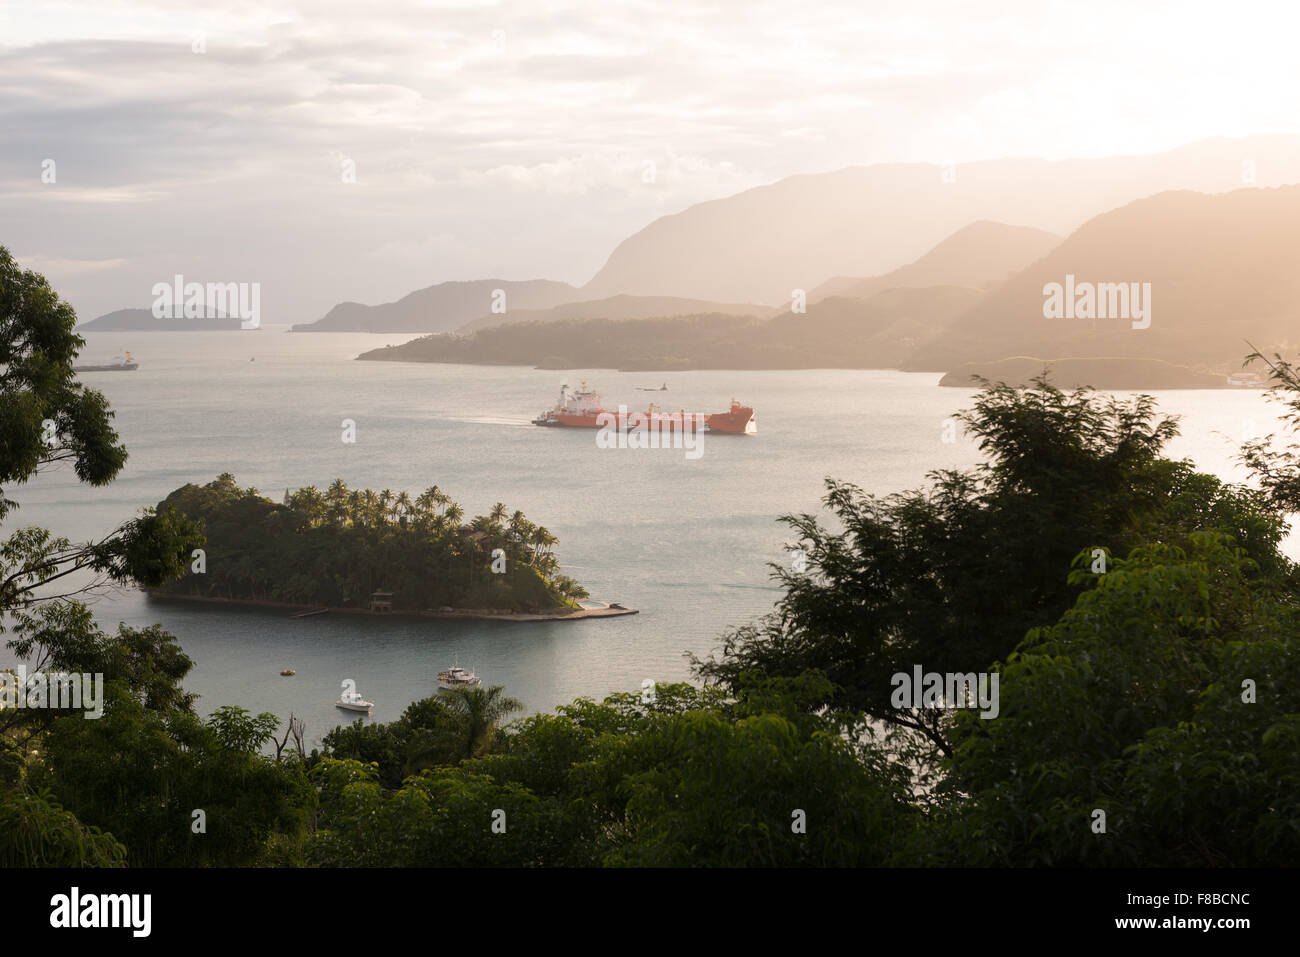 A ship passes in front of Ilha das Cabras, Ilhabela, Brazil Stock Photo